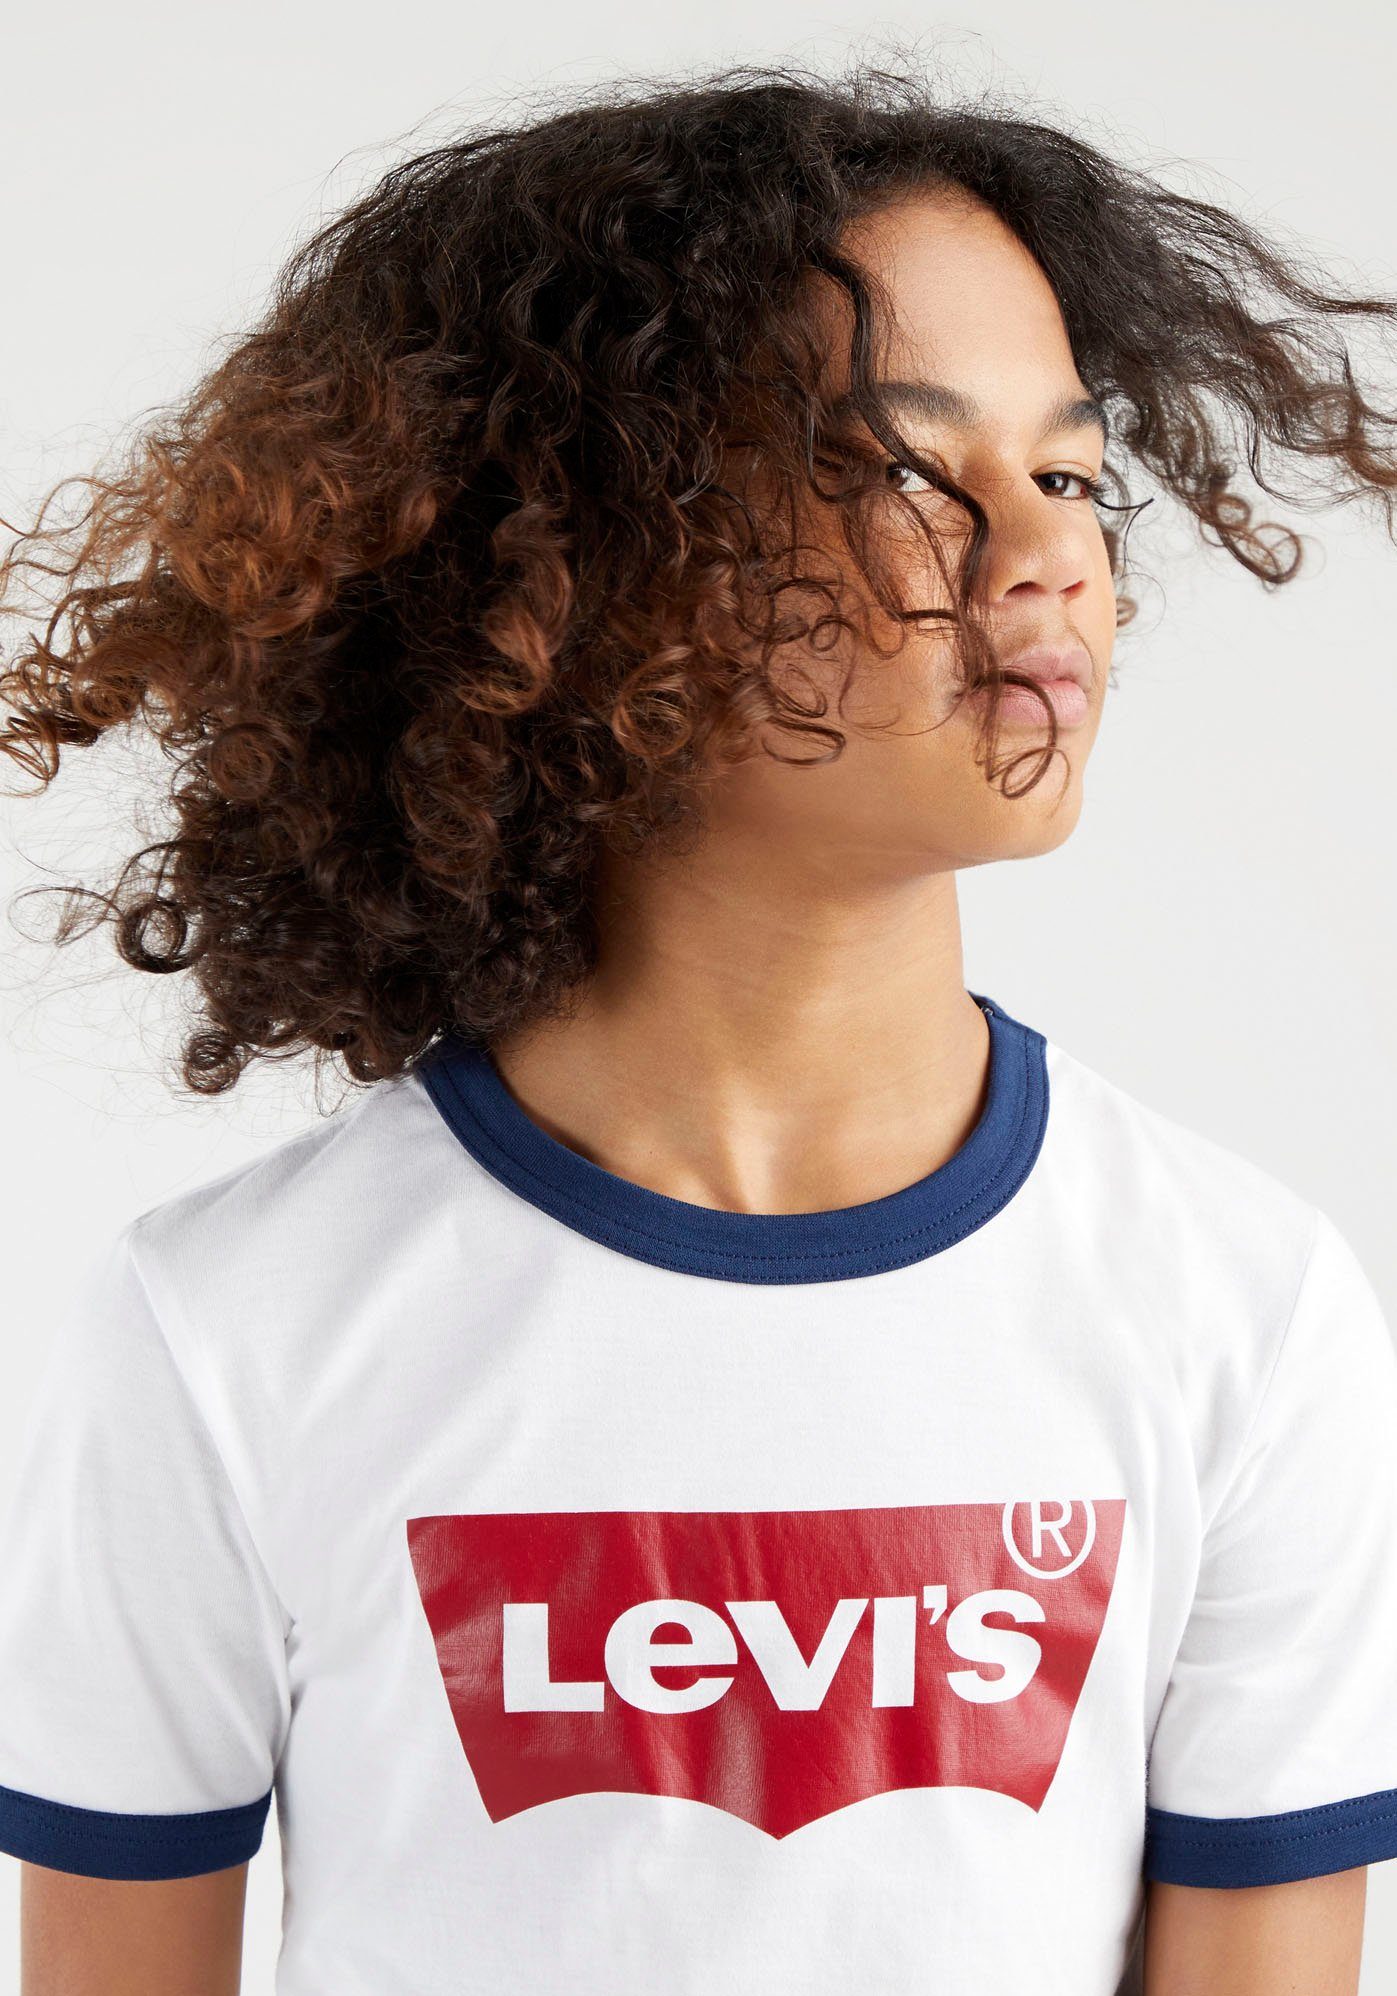 Kids T-Shirt weiß BOYS RINGER for BATWING Levi's® TEE